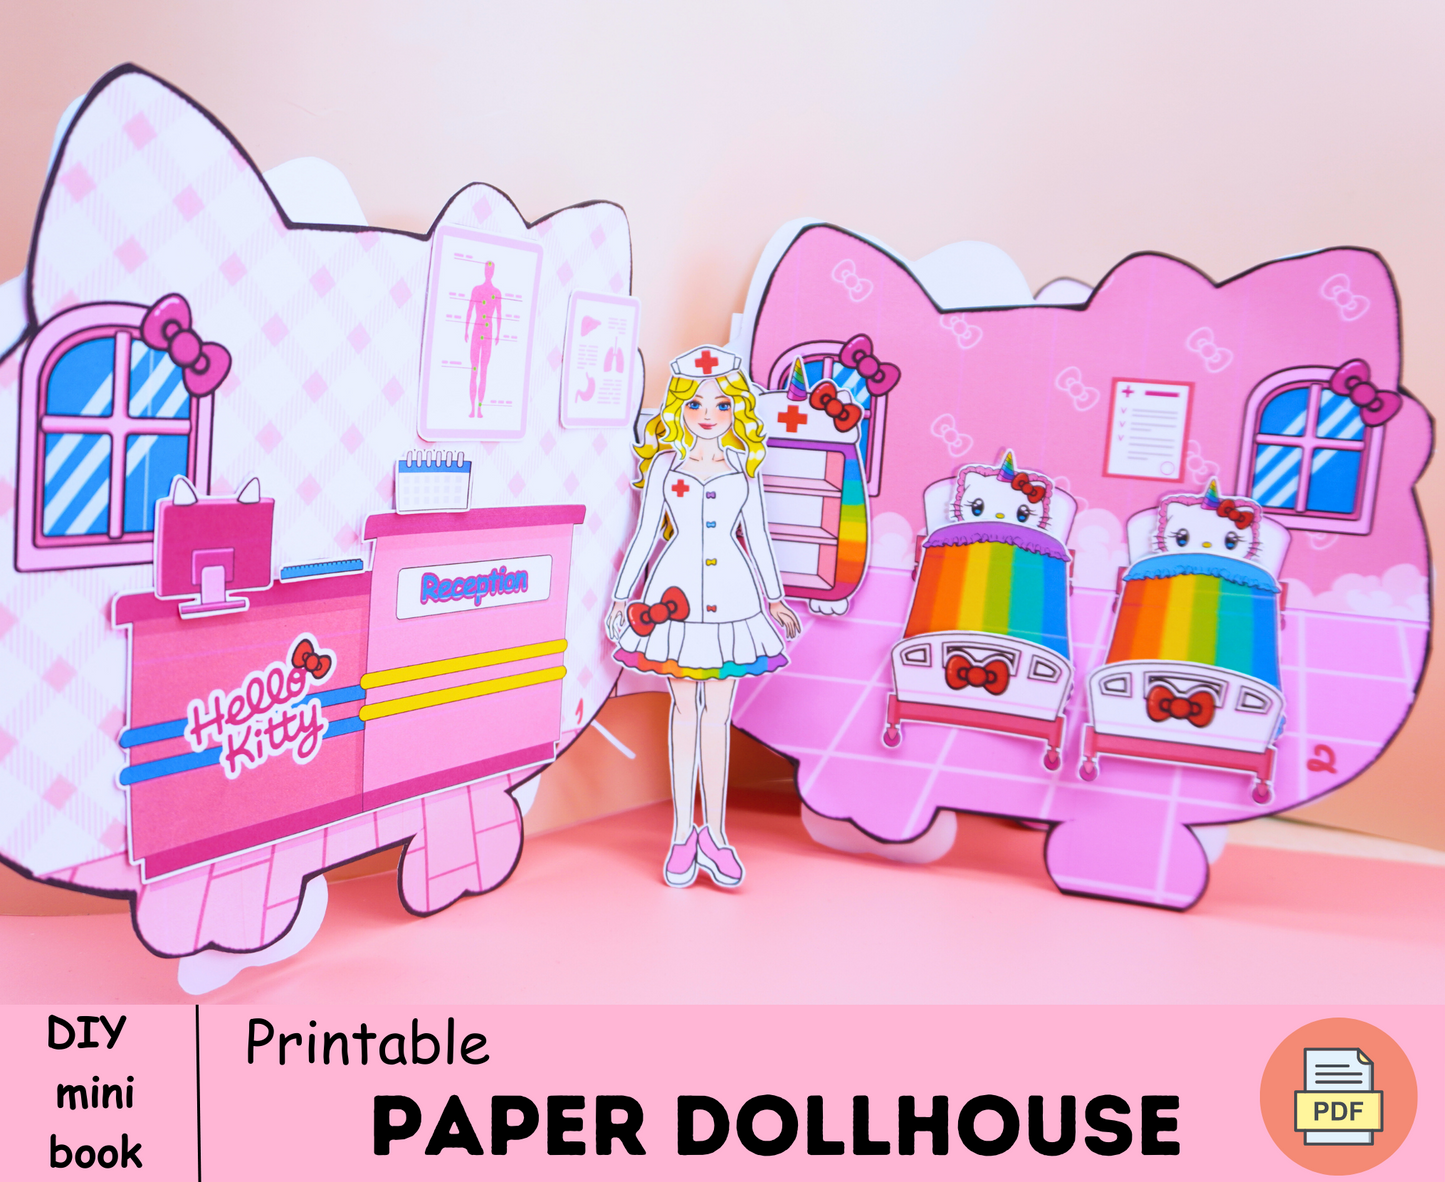 Kitty Cat Hospital vs Doctor Barbie printables 🌈 Pink Kitty dollhouse busy book printables | DIY kit for kids | Cutting Practice for girls🌈 Woa Doll Crafts